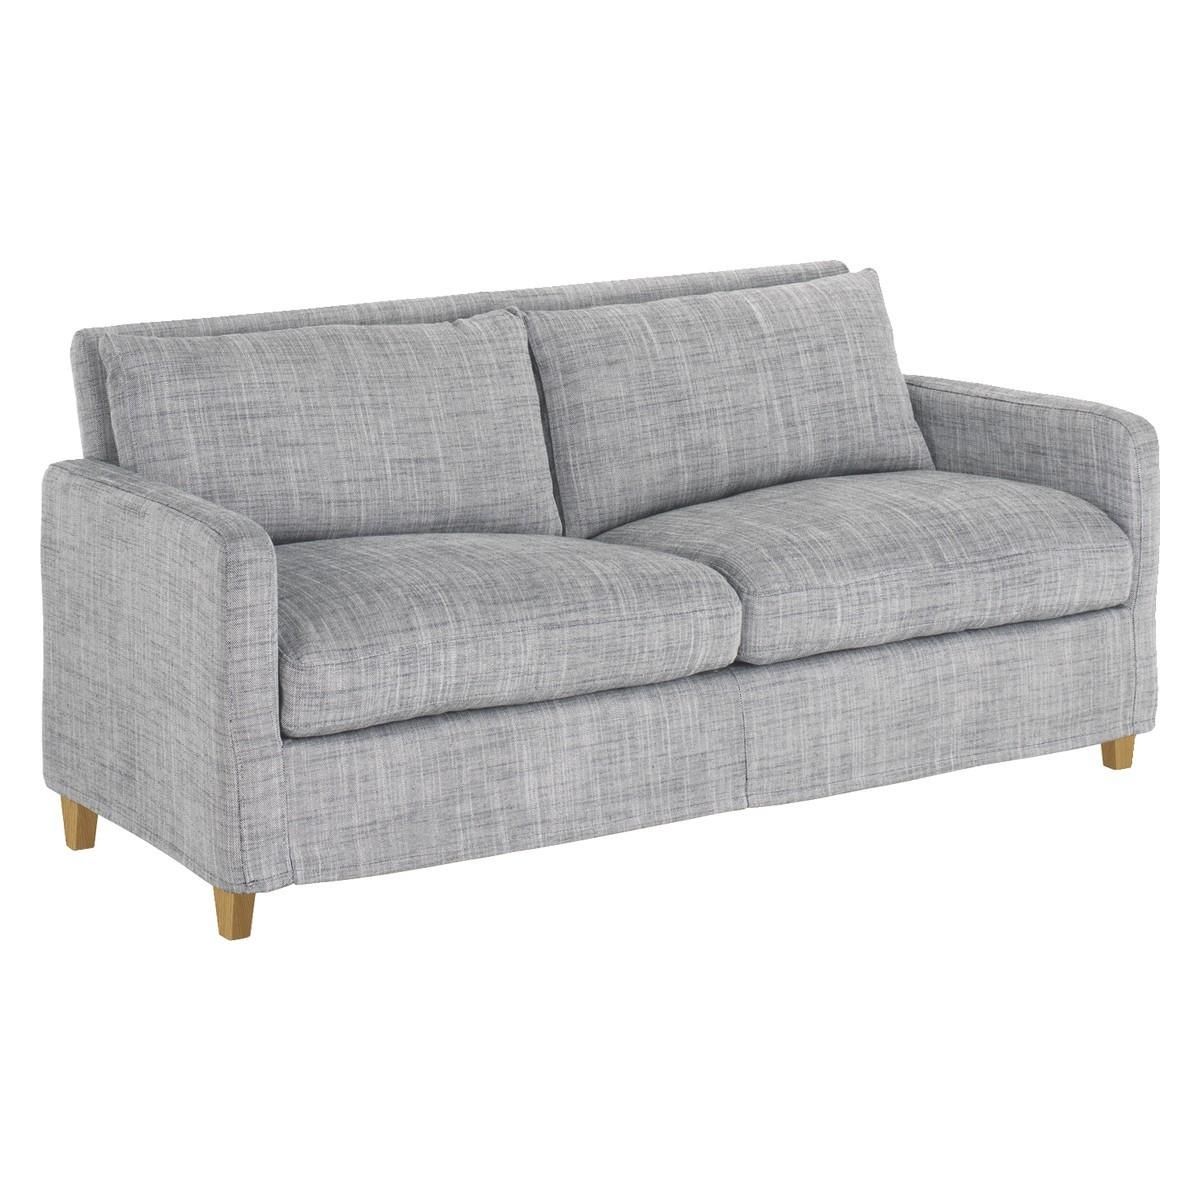 Sofas Center : Smalleaterofas Uk Forpacessmall Uksmall Heals2paces Throughout Small 2 Seater Sofas (View 16 of 20)